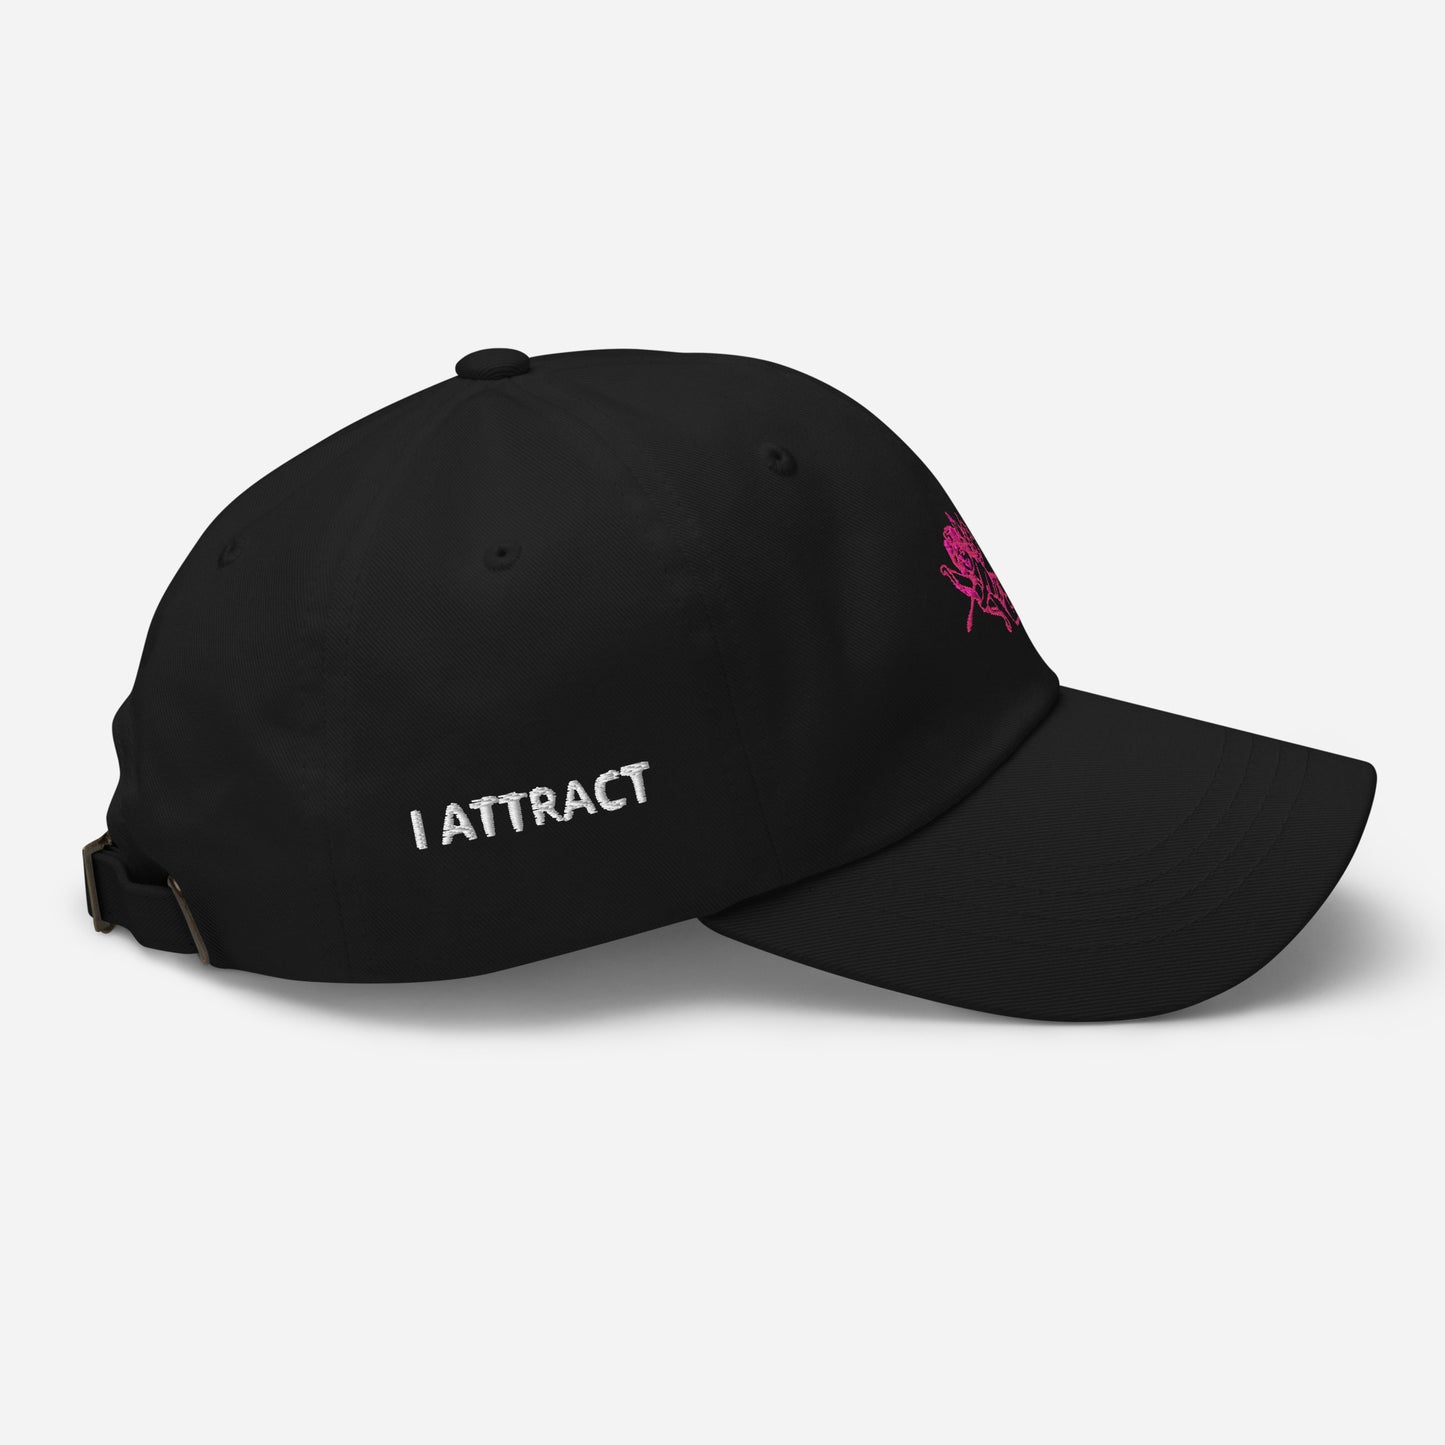 I Don't Chase, I Attract Dad hat